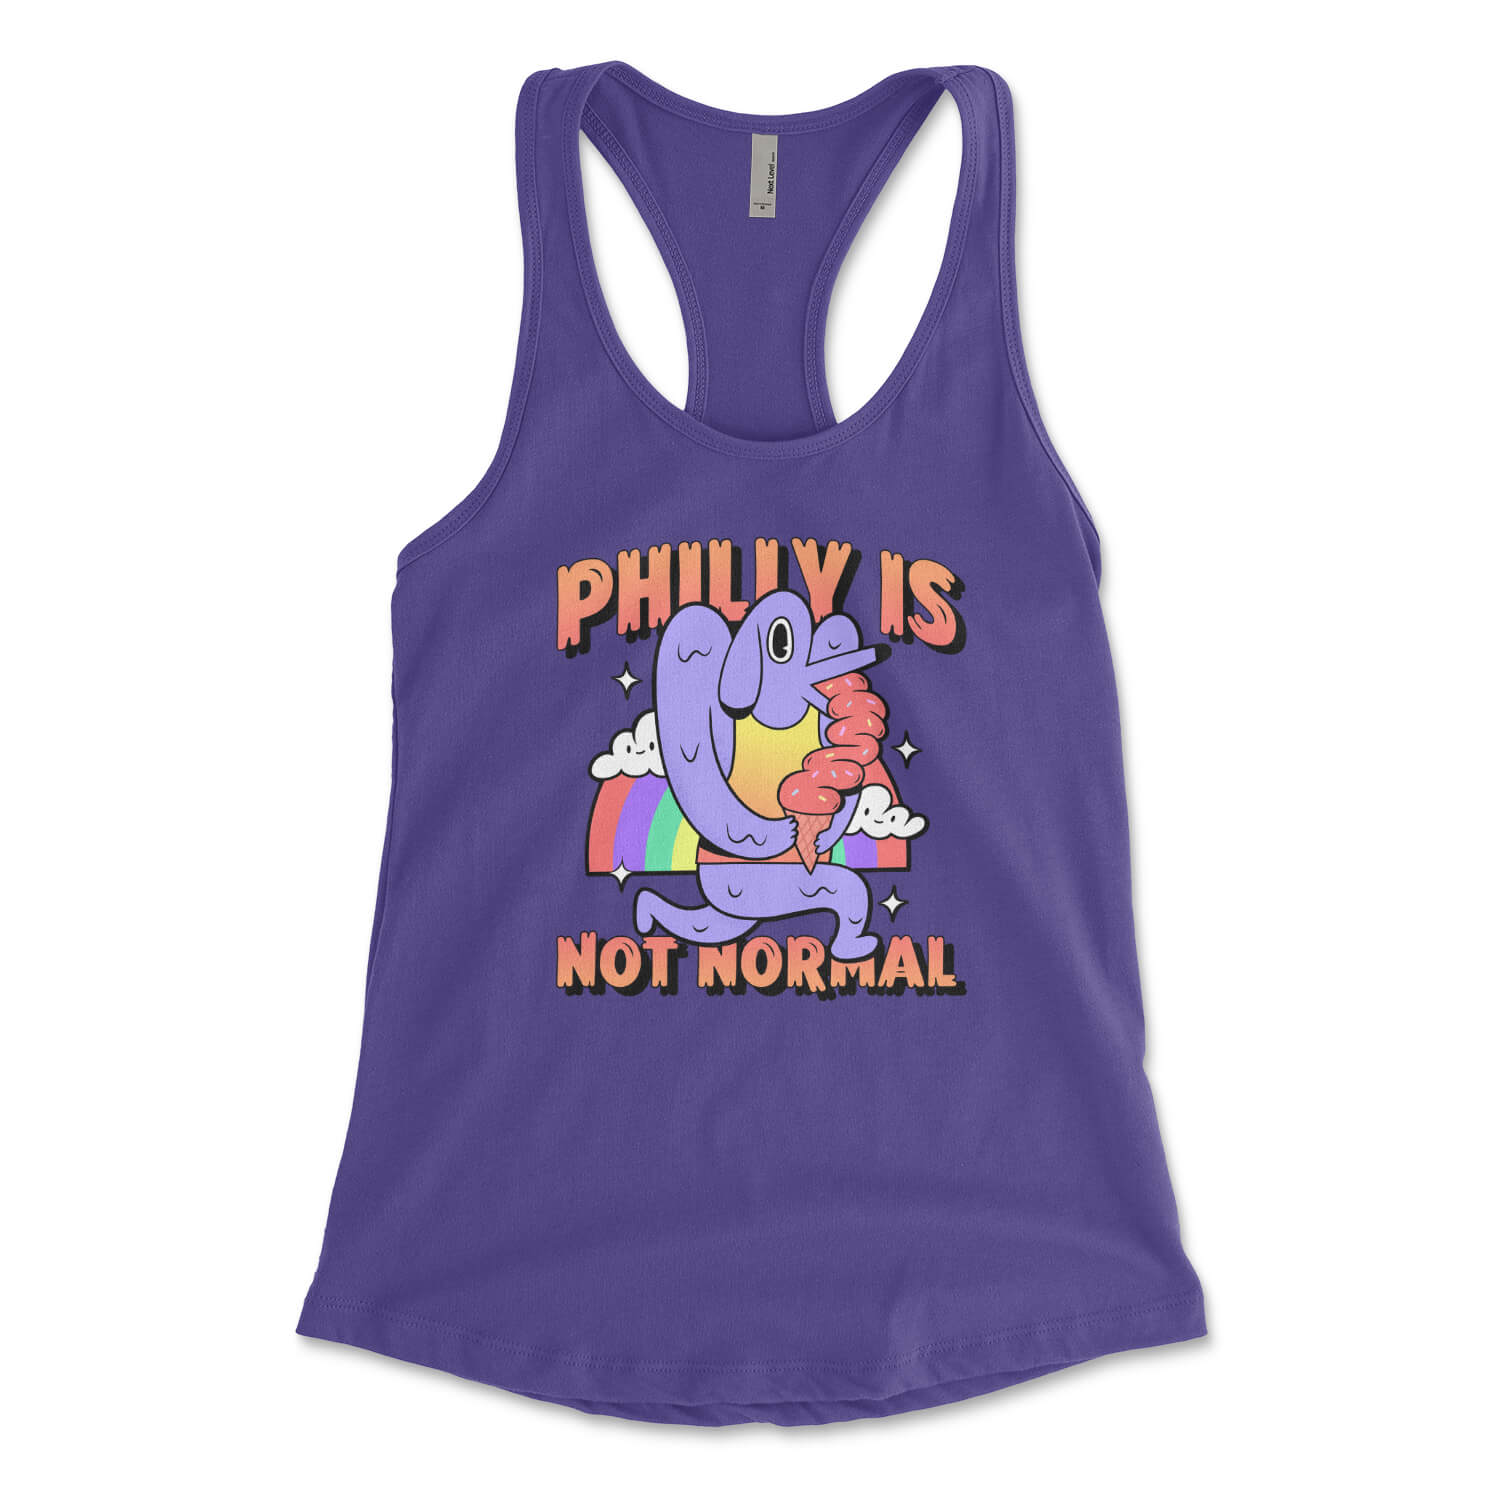 Philly is not normal dog licking ice cream in front of a rainbow design on a purple womens racerback tank top from Phillygoat